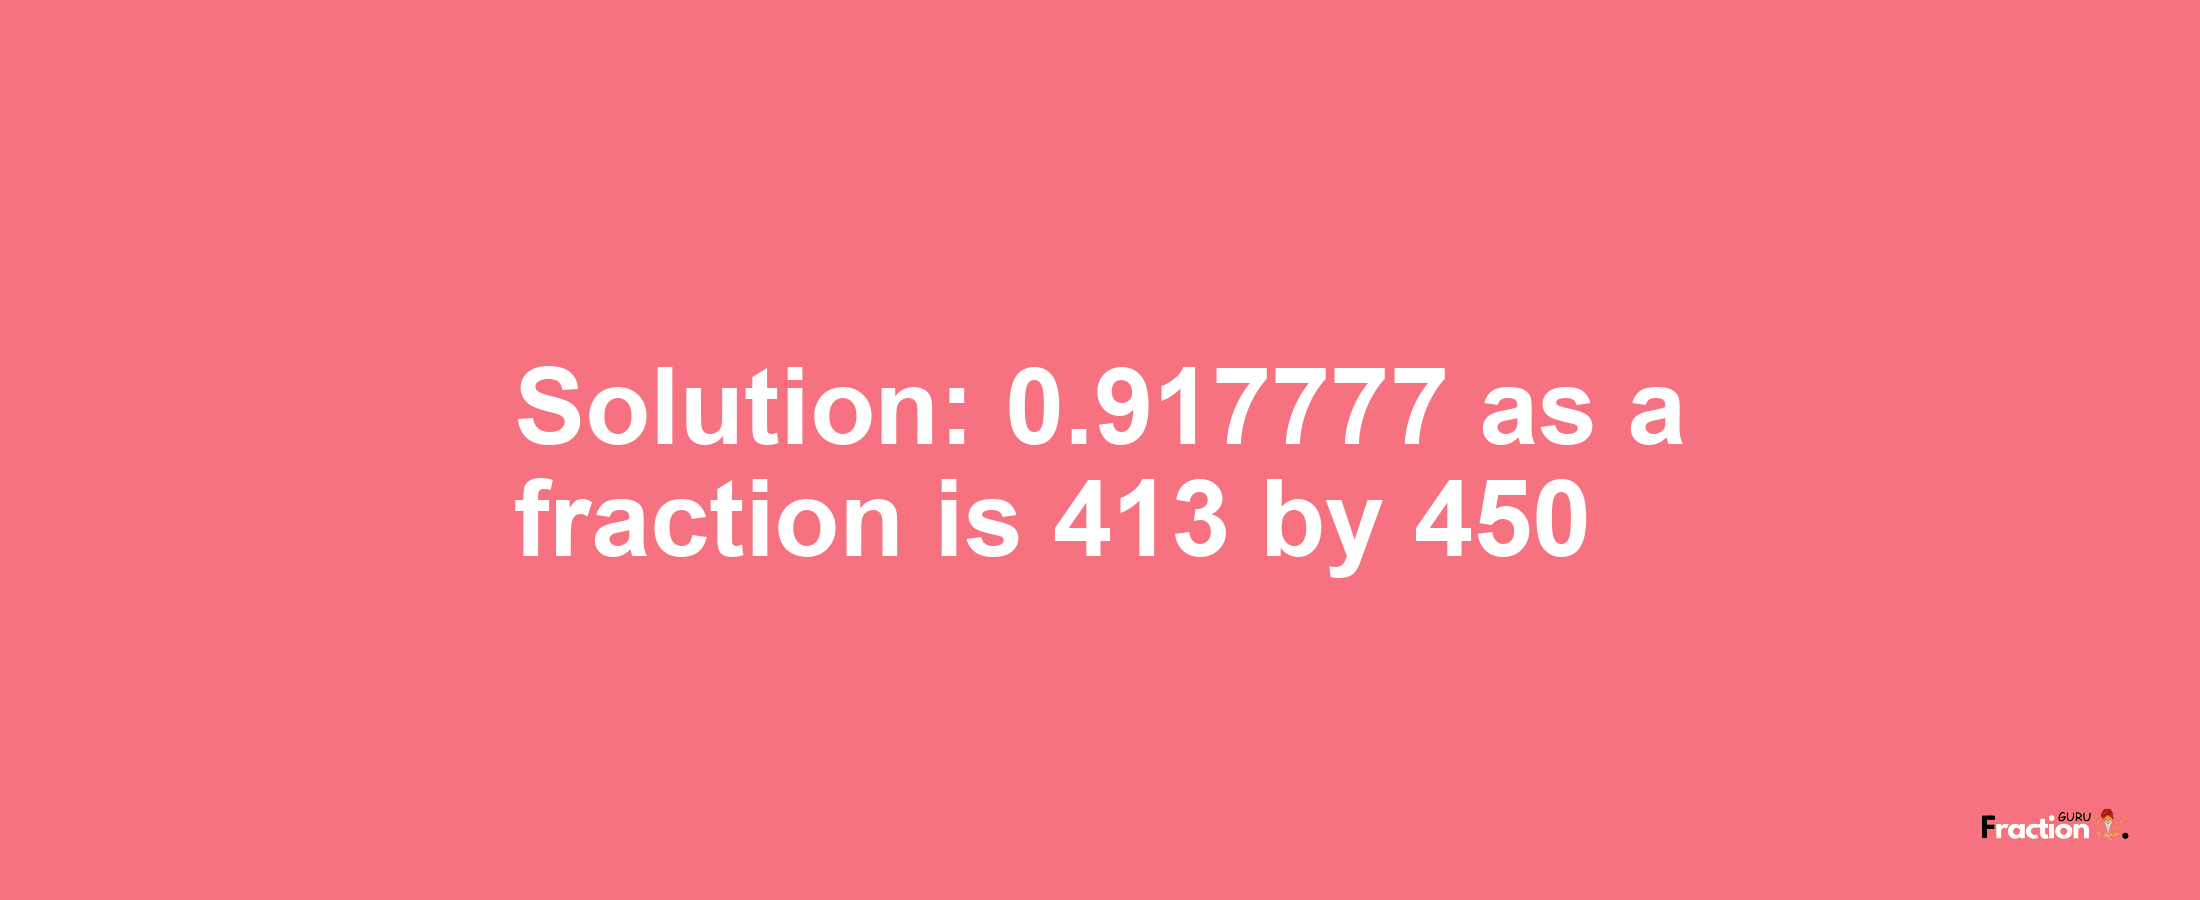 Solution:0.917777 as a fraction is 413/450